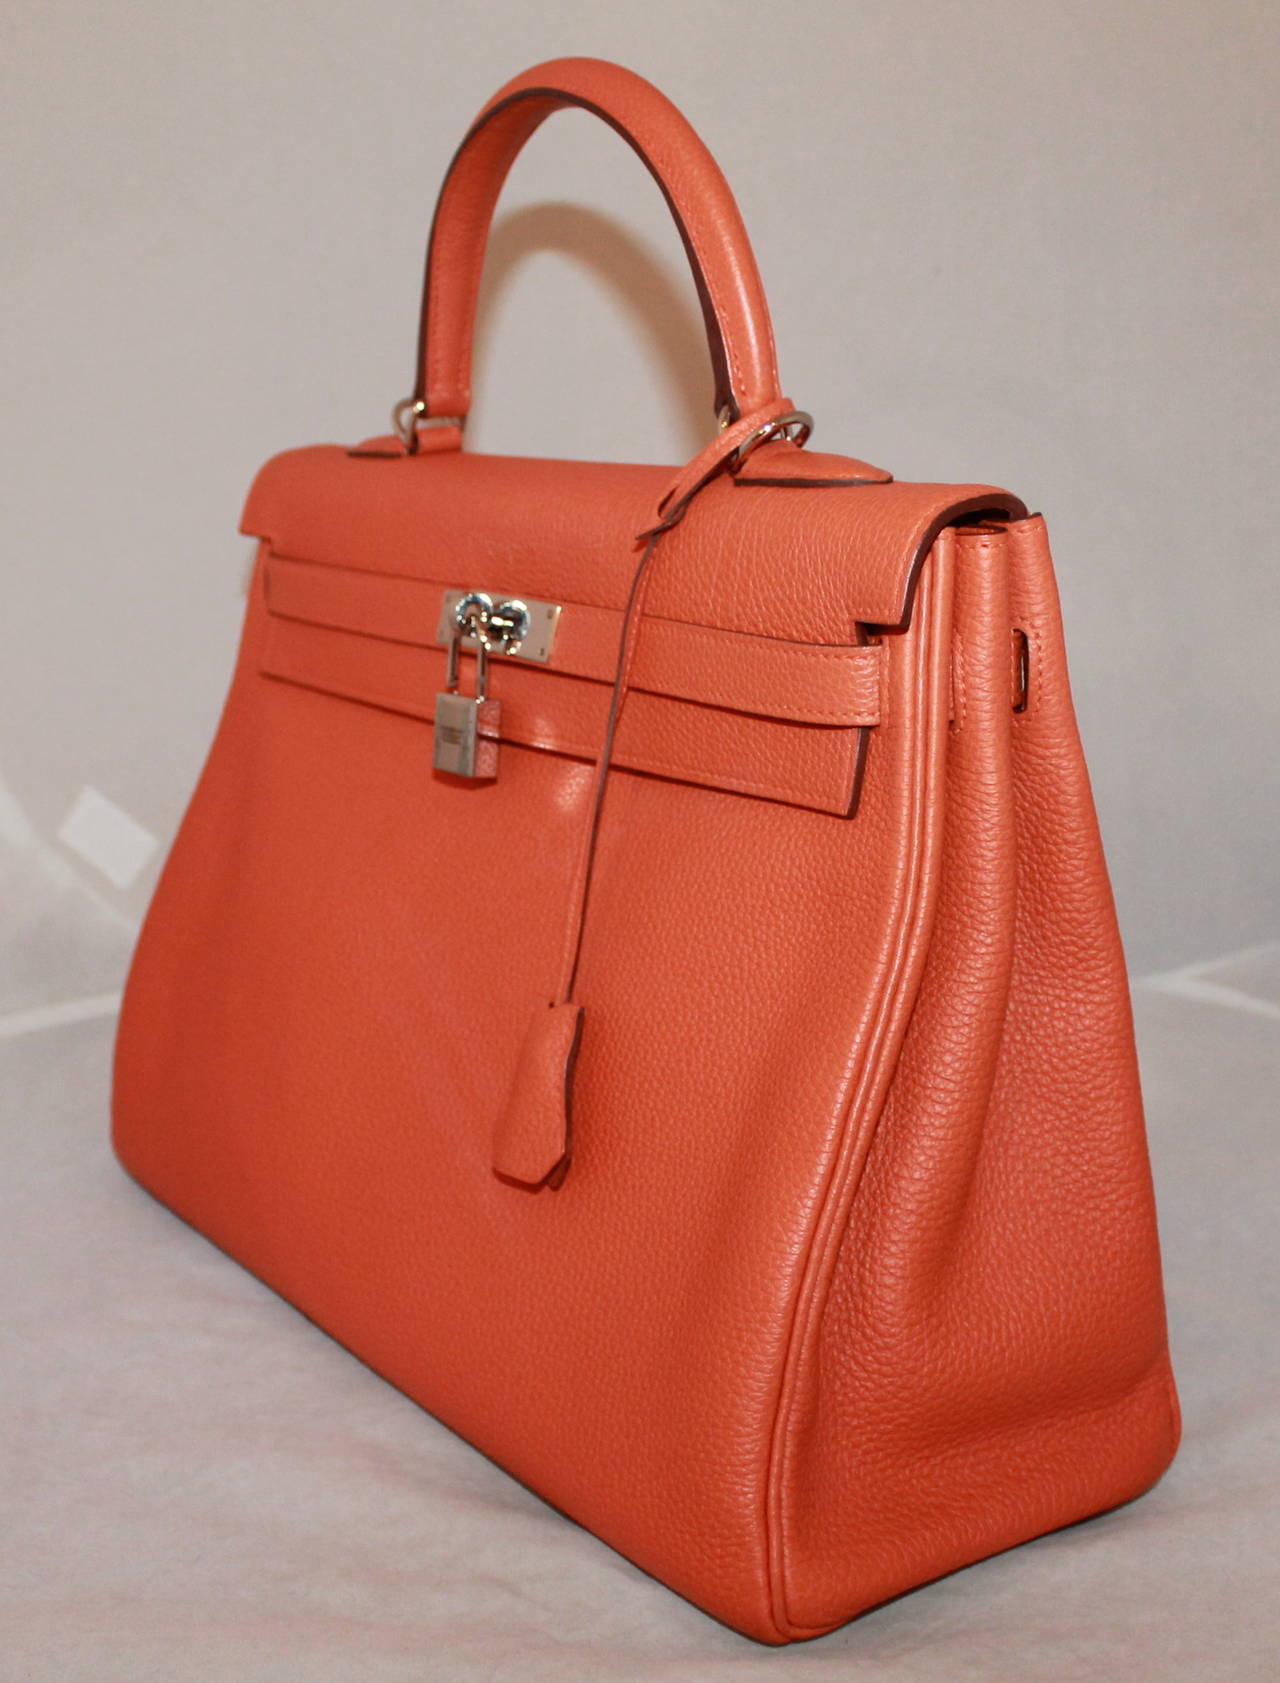 Hermes Orange Leather Kelly Handbag SHW - circa 2012. This handbag is in good condition with one minor stain on the backside of the handbag. The hardware is in good condition, however the lock shows signs of use.

Measurements:
Length-